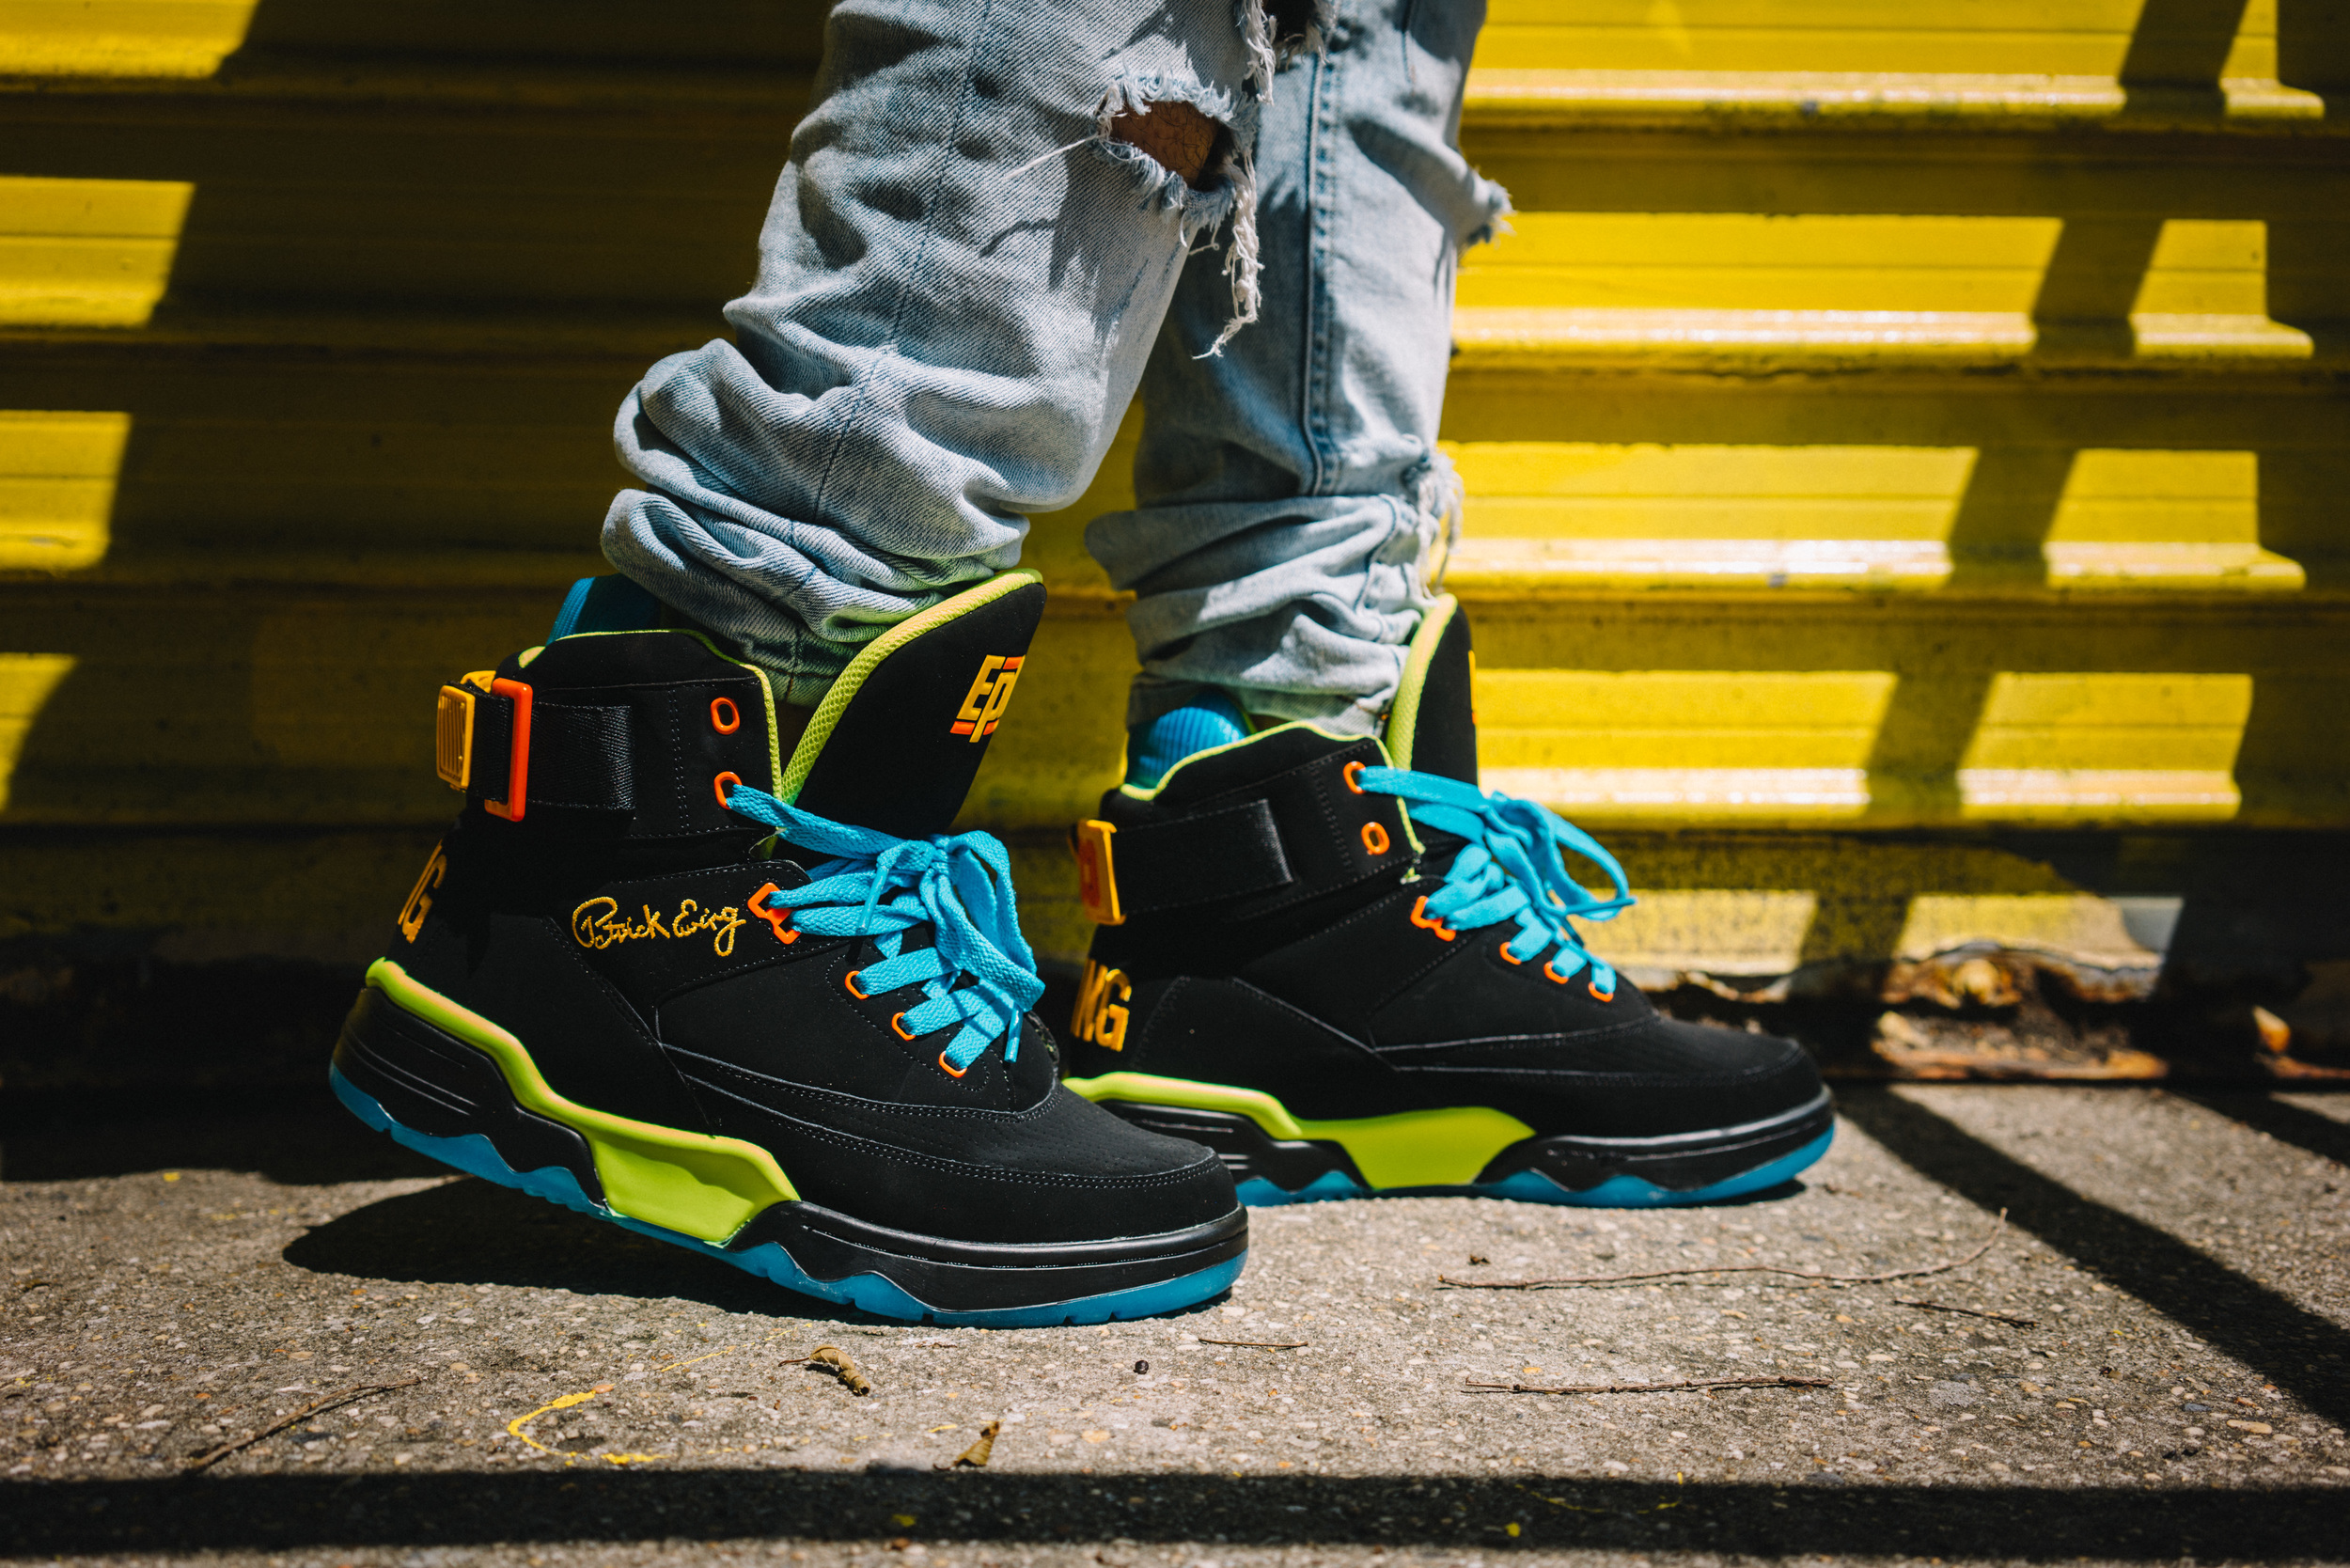 Ewing Athletics and EPMD Link for a 